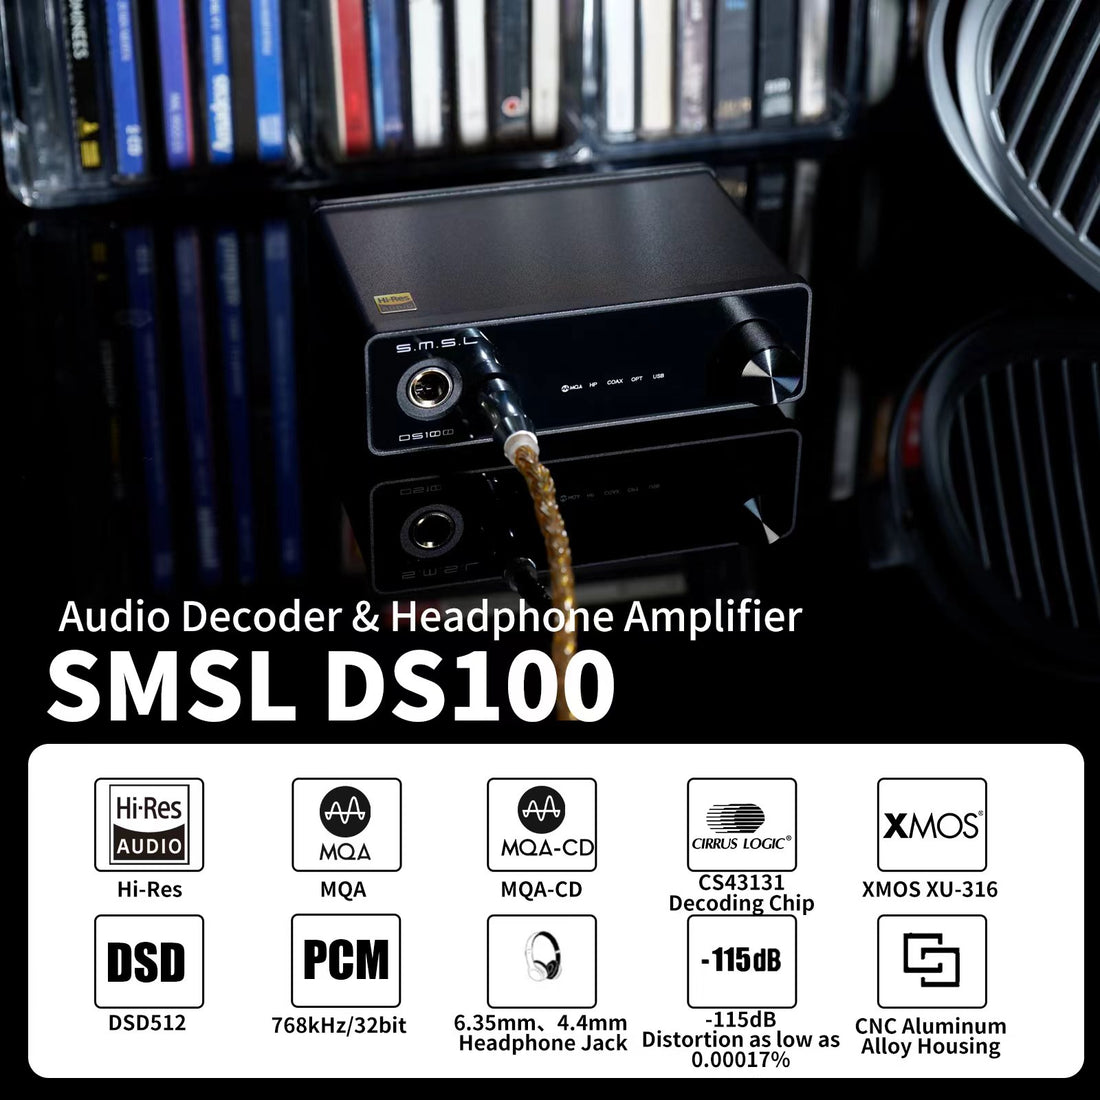 SMSL DS100 Review